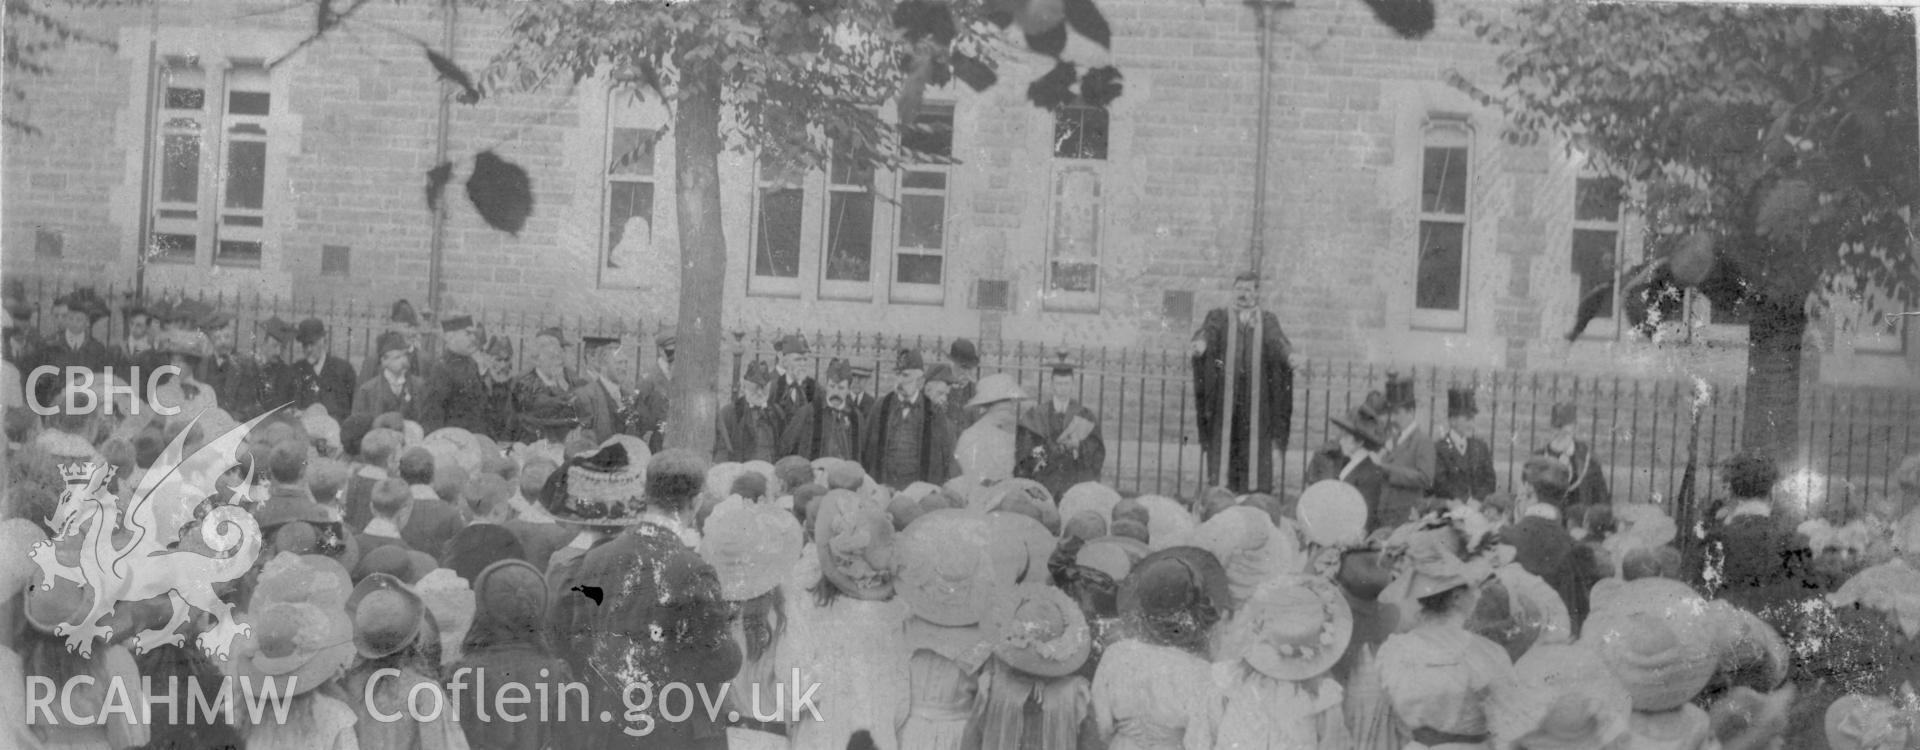 'Opening of Alexandra School extension 1910' .  Digitised from a photograph album showing views of Aberystwyth and District, produced by David John Saer, school teacher of Aberystwyth. Loaned for copying by Dr Alan Chamberlain.